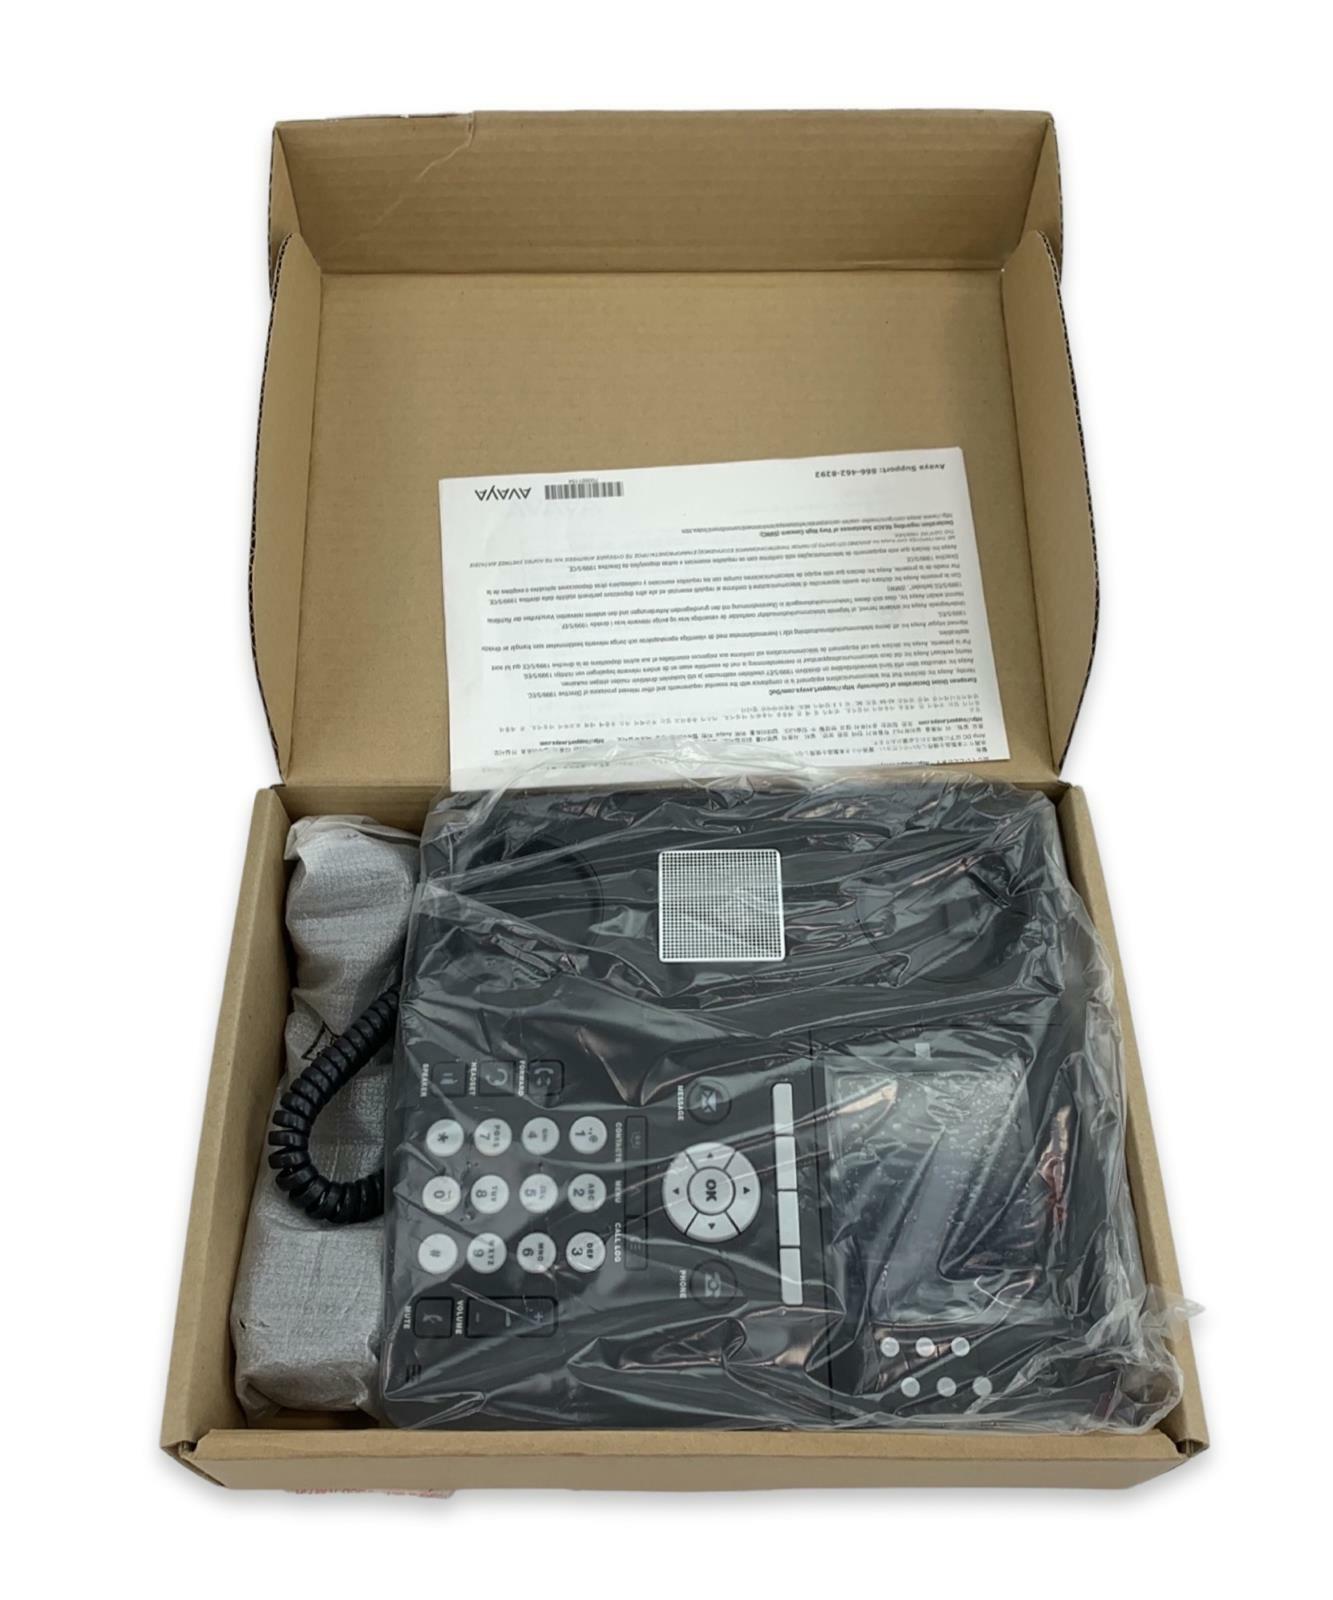 Avaya 9640 IP Business Office Telephone 9640D01A-1009 Charcoal Gray